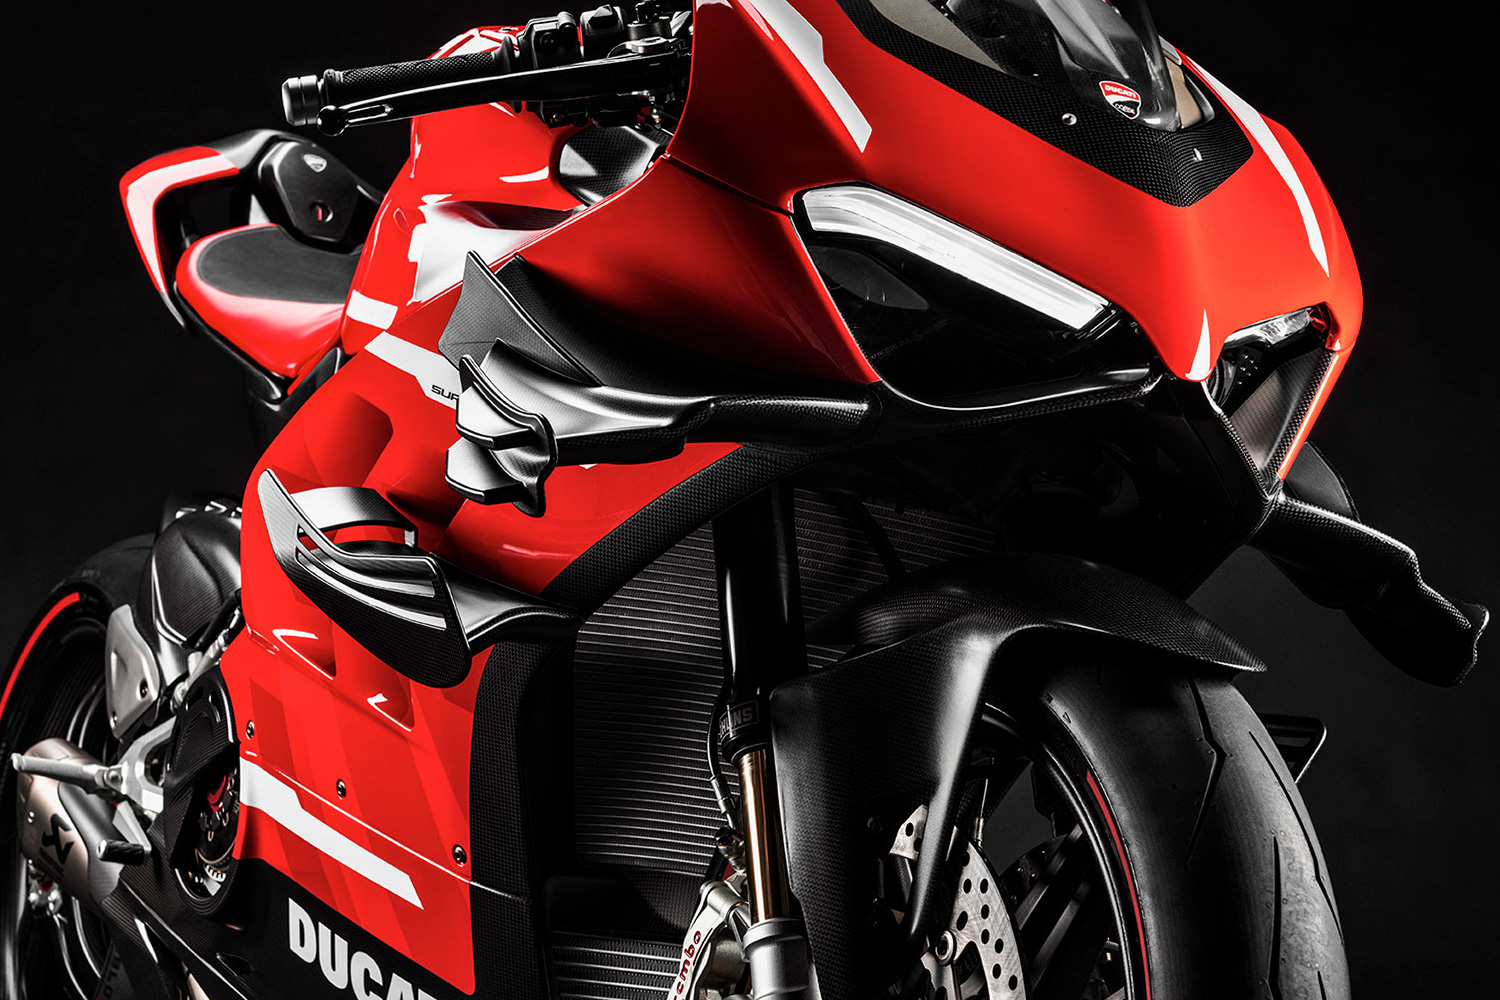 Close up of front end of Ducati Superleggera V4 with lights on and winglets in front of a black screen.